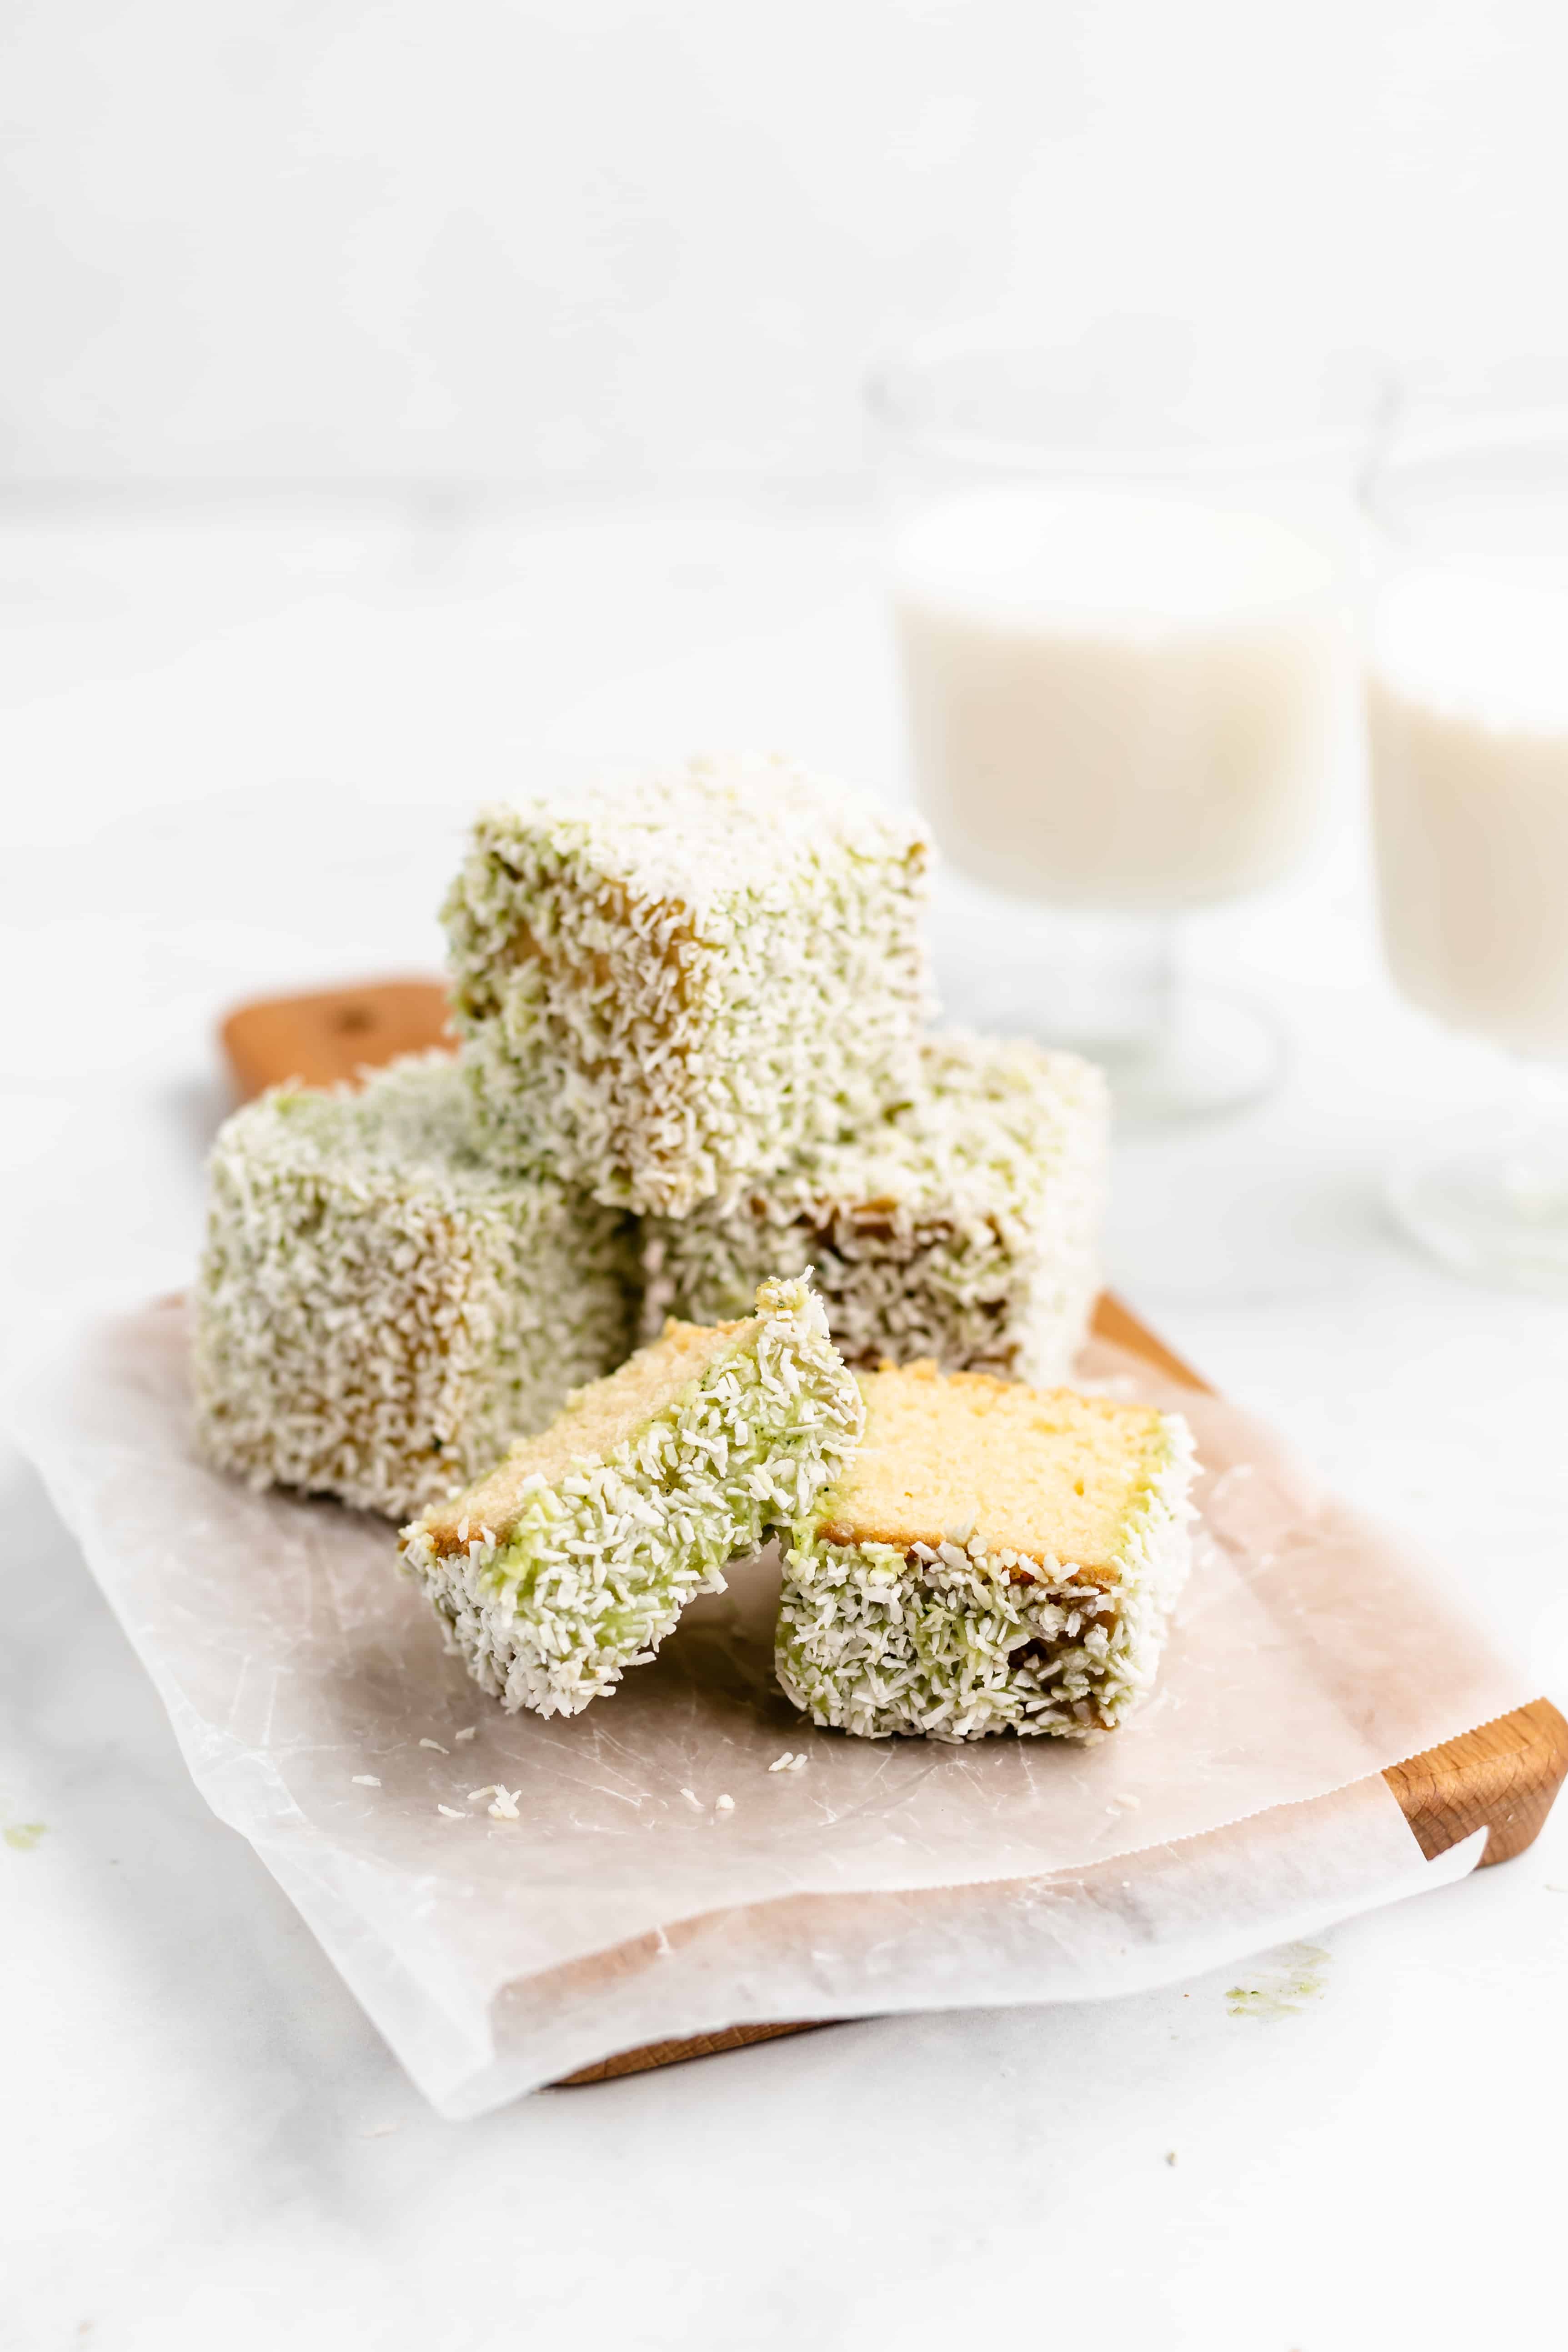 White Chocolate Lamingtons - almond flavored butter cake dipped in white chocolate and coated with coconut. #lamington